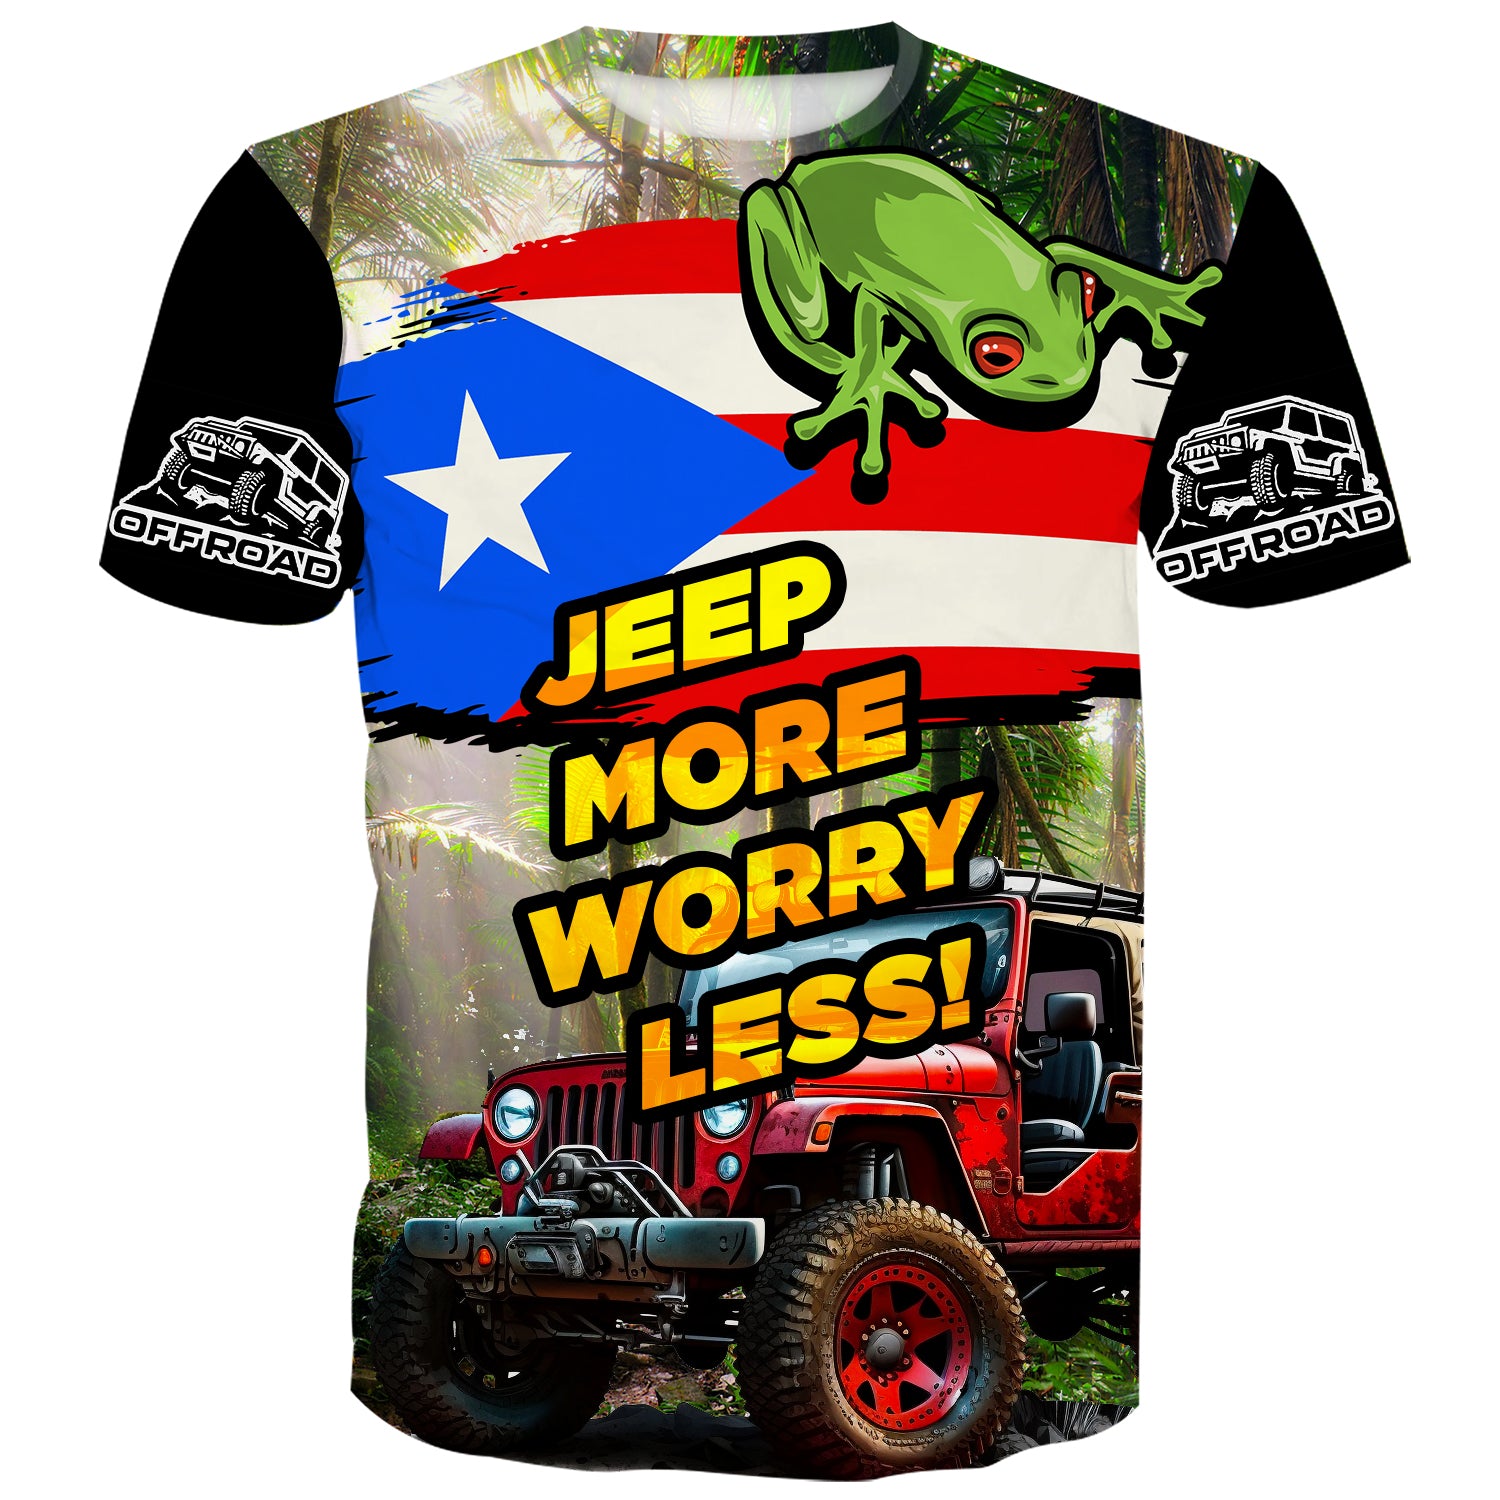 Jeep more worry less - T-Shirt